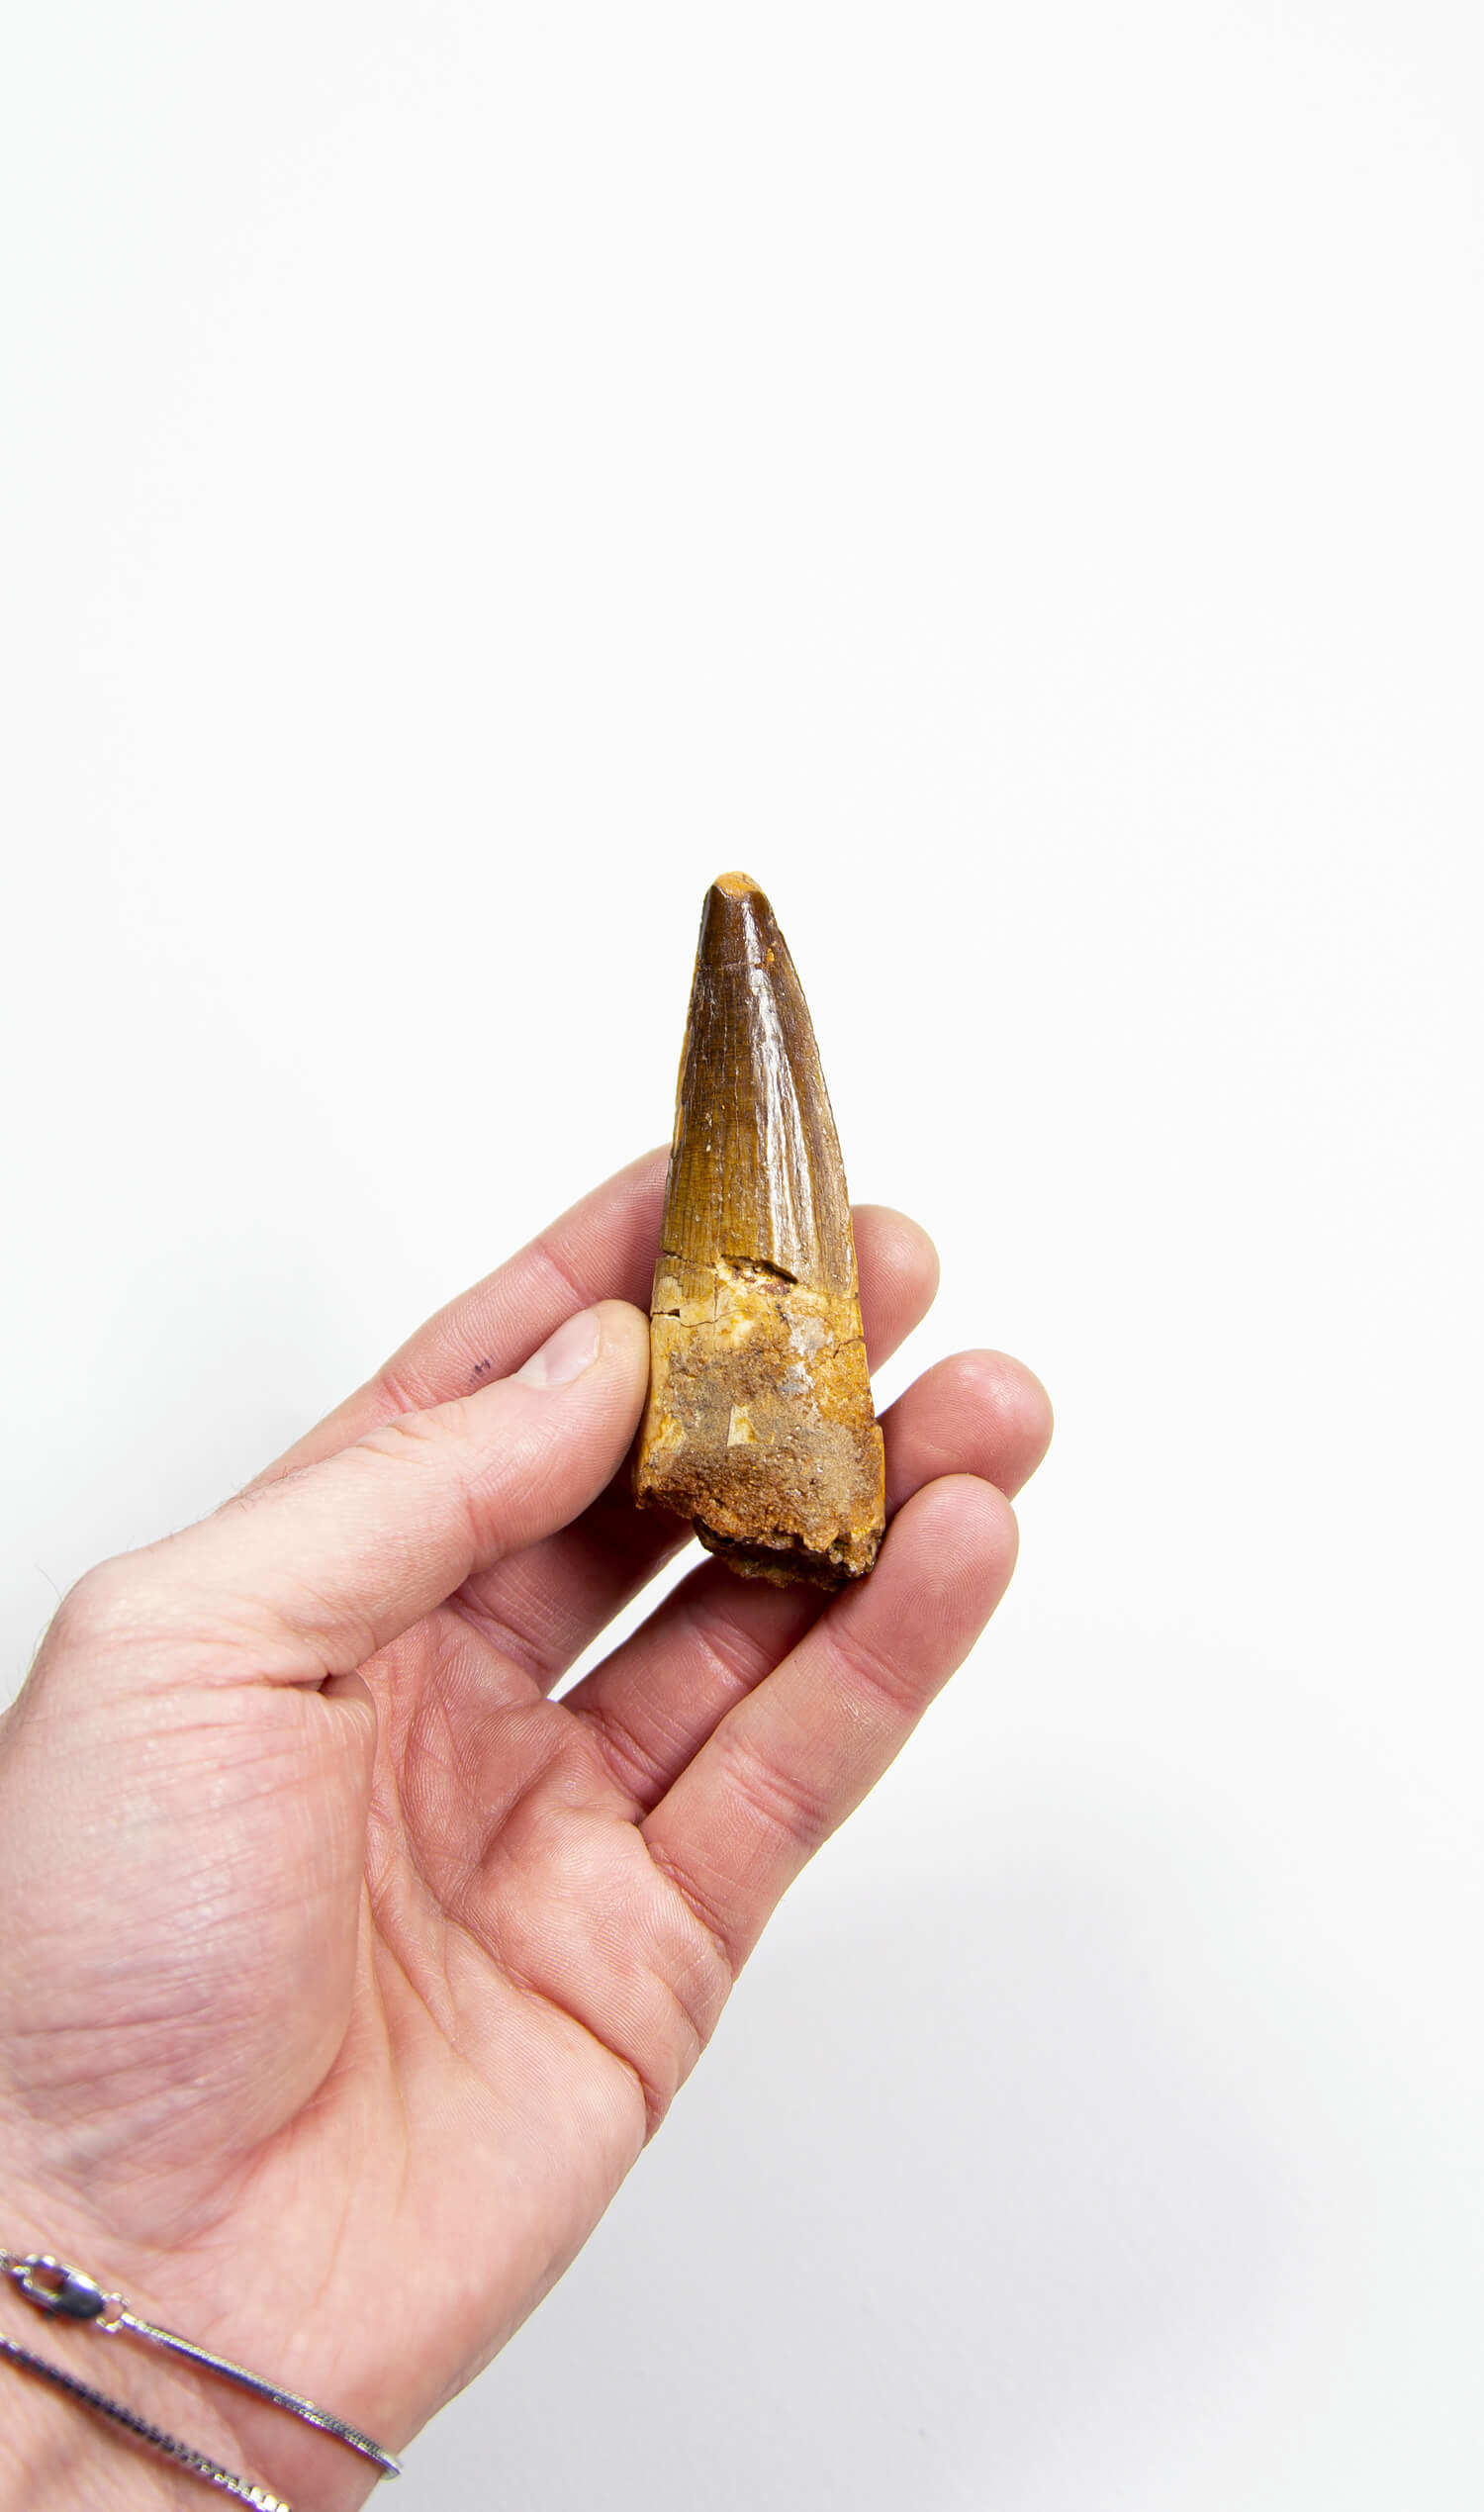 fossil dinosaur spinosaurus tooth for sale at the uk fossil store 86